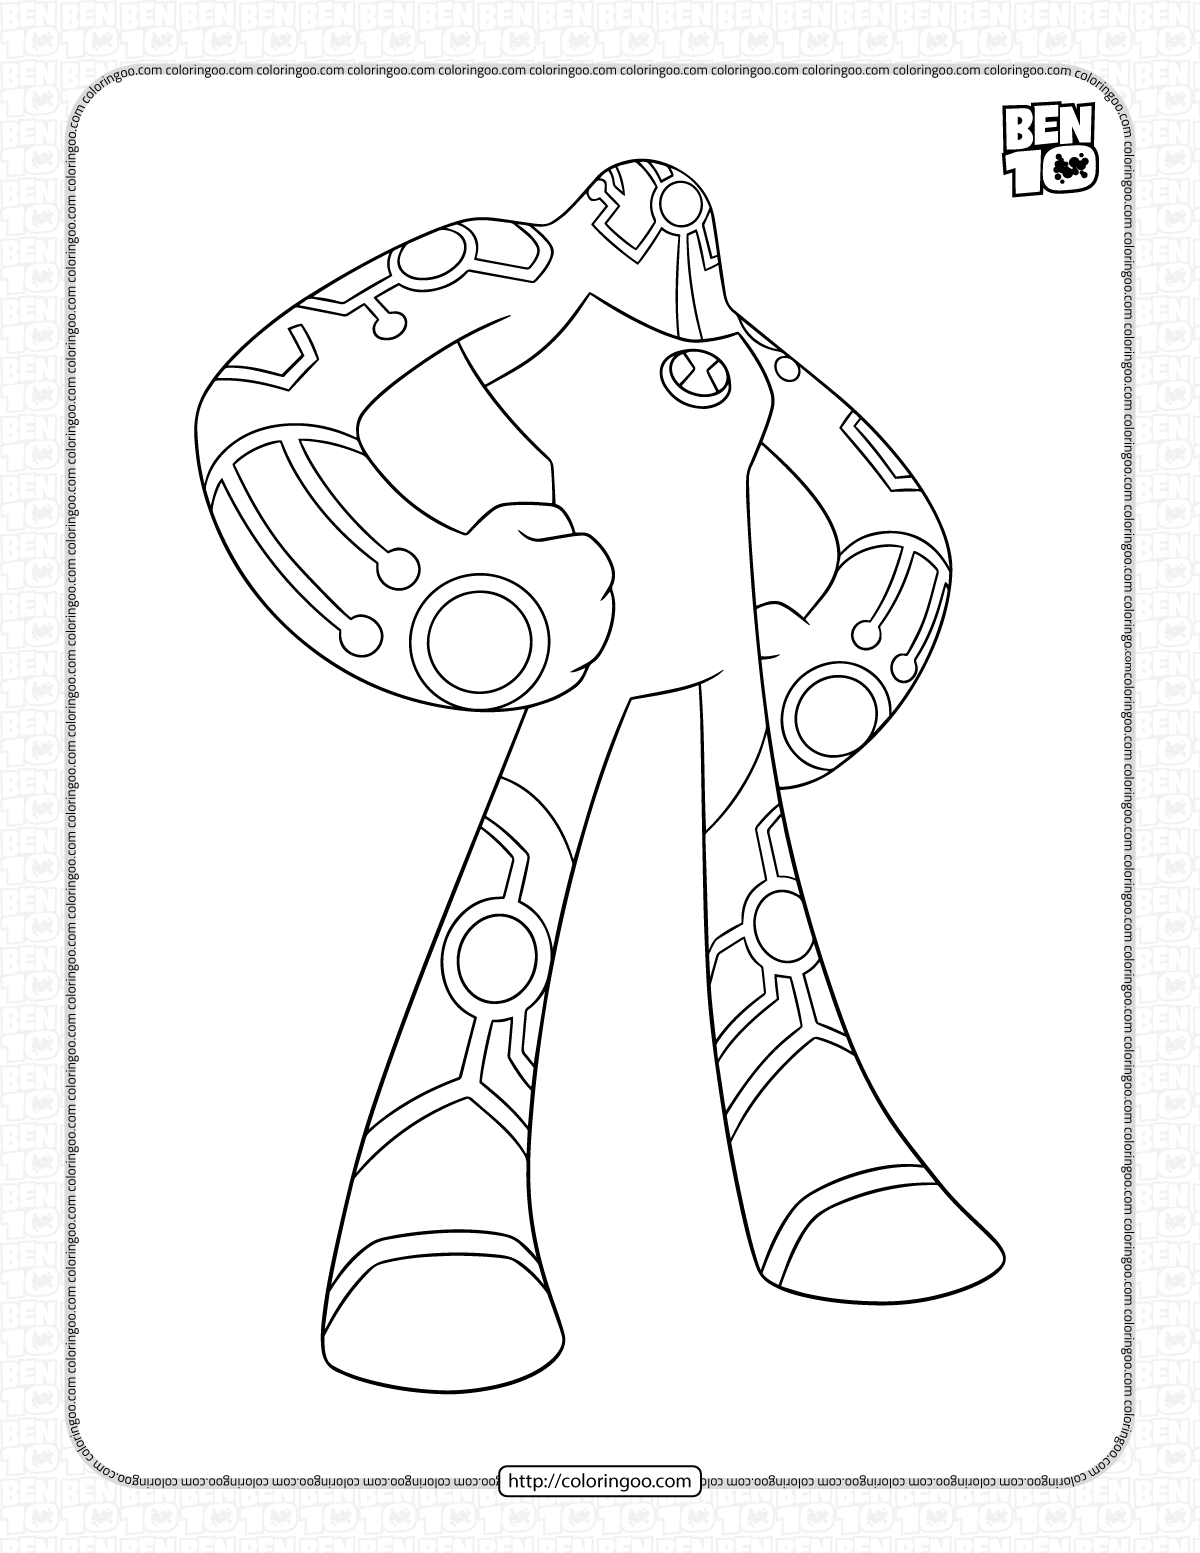 ben 10 upgrade reboot coloring pages